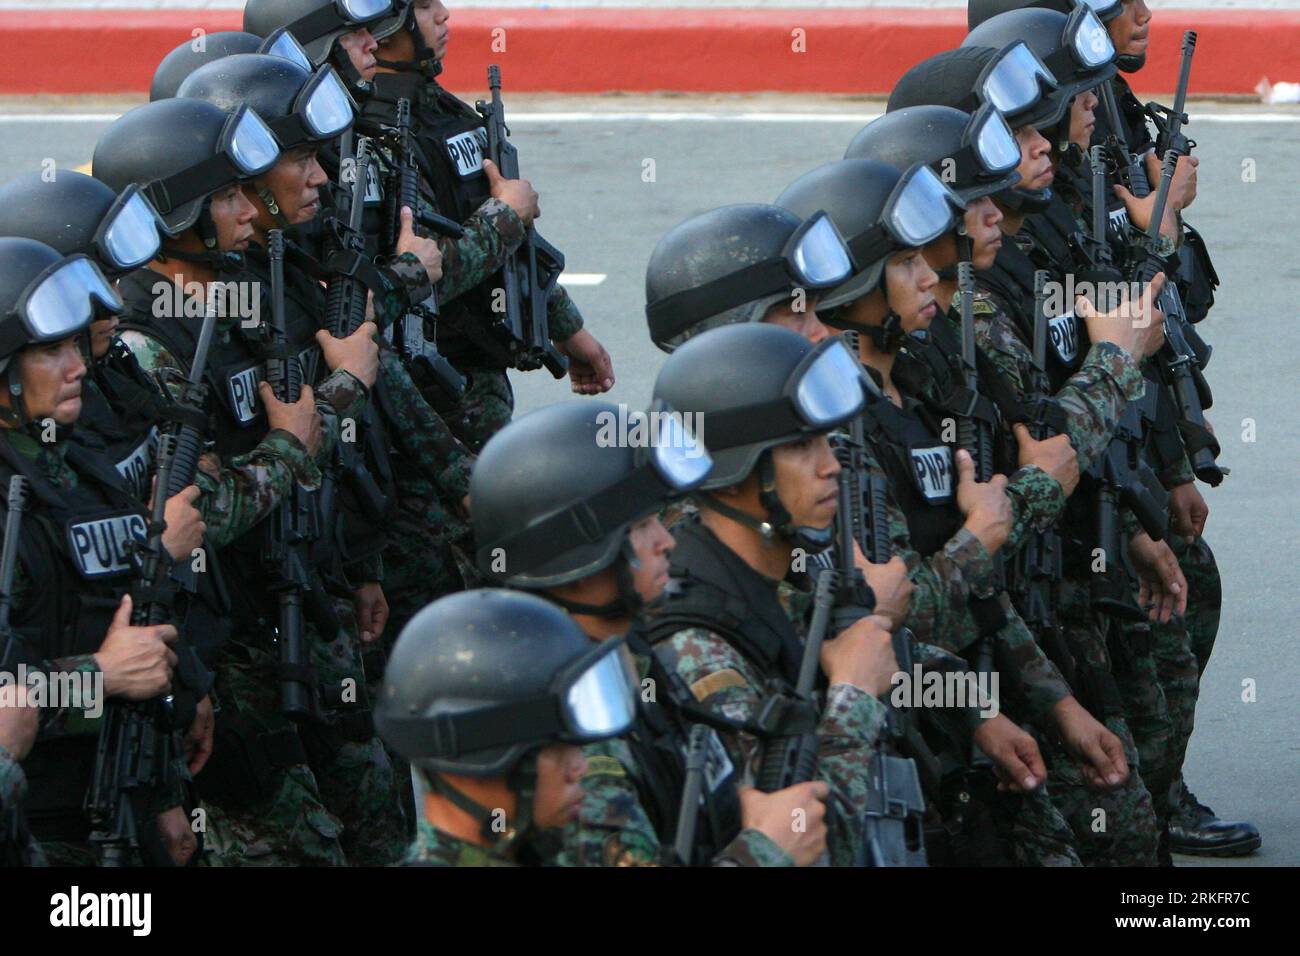 Bildnummer: 55449373  Datum: 12.06.2011  Copyright: imago/Xinhua (110612) -- MANILA, June 12, 2011 (Xinhua) -- Members from the Philippine National Police Special Action Force (PNP-SAF) march during a parade celebrating the Philippine Independence Day in Manila, the Philippines, on June 12, 2011. The Philippines celebrated on Sunday the 113th anniversary of the proclamation of independence from Spanish rule.(Xinhua/Rouelle Umali) (cl) PHILIPPINES-PARADE CELEBRATING PHILIPPINE INDEPENDENCE PUBLICATIONxNOTxINxCHN Gesellschaft Politik Manila Unabhängigkeitstag xcb x0x 2011 quer     Bildnummer 554 Stock Photo